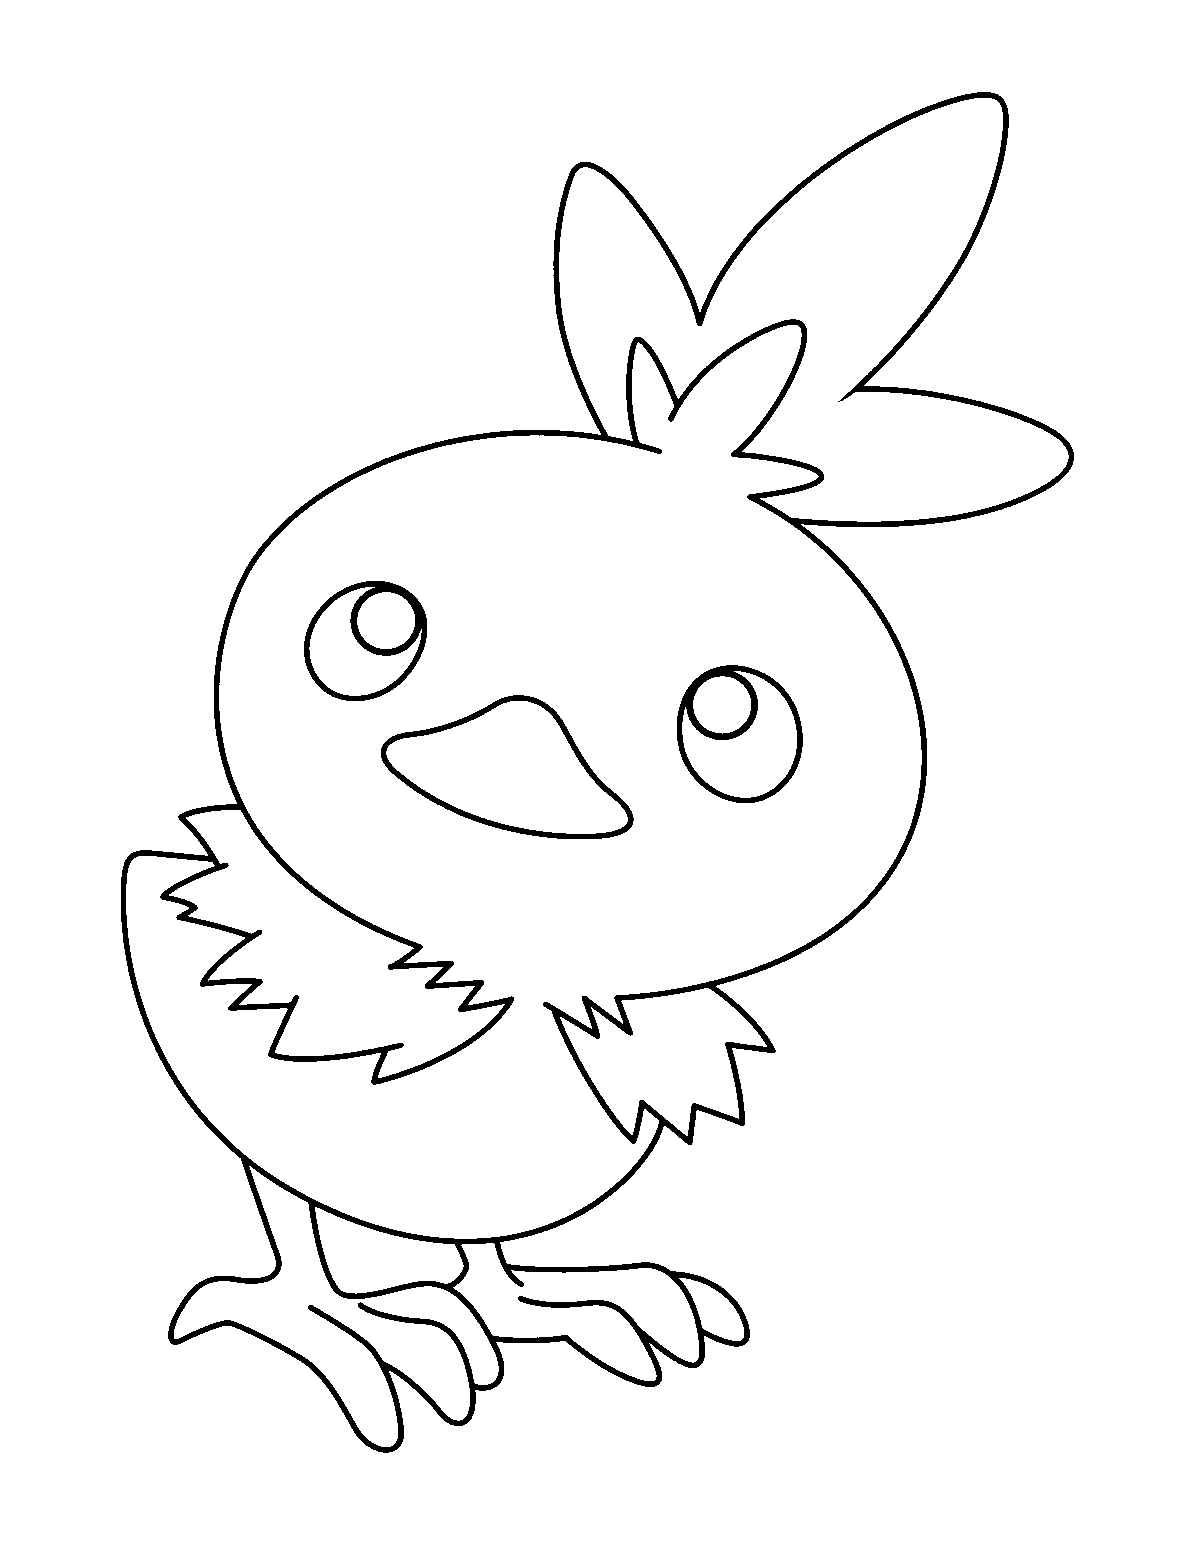 Torchic Coloring Pages - Free Printable Coloring Pages for Kids